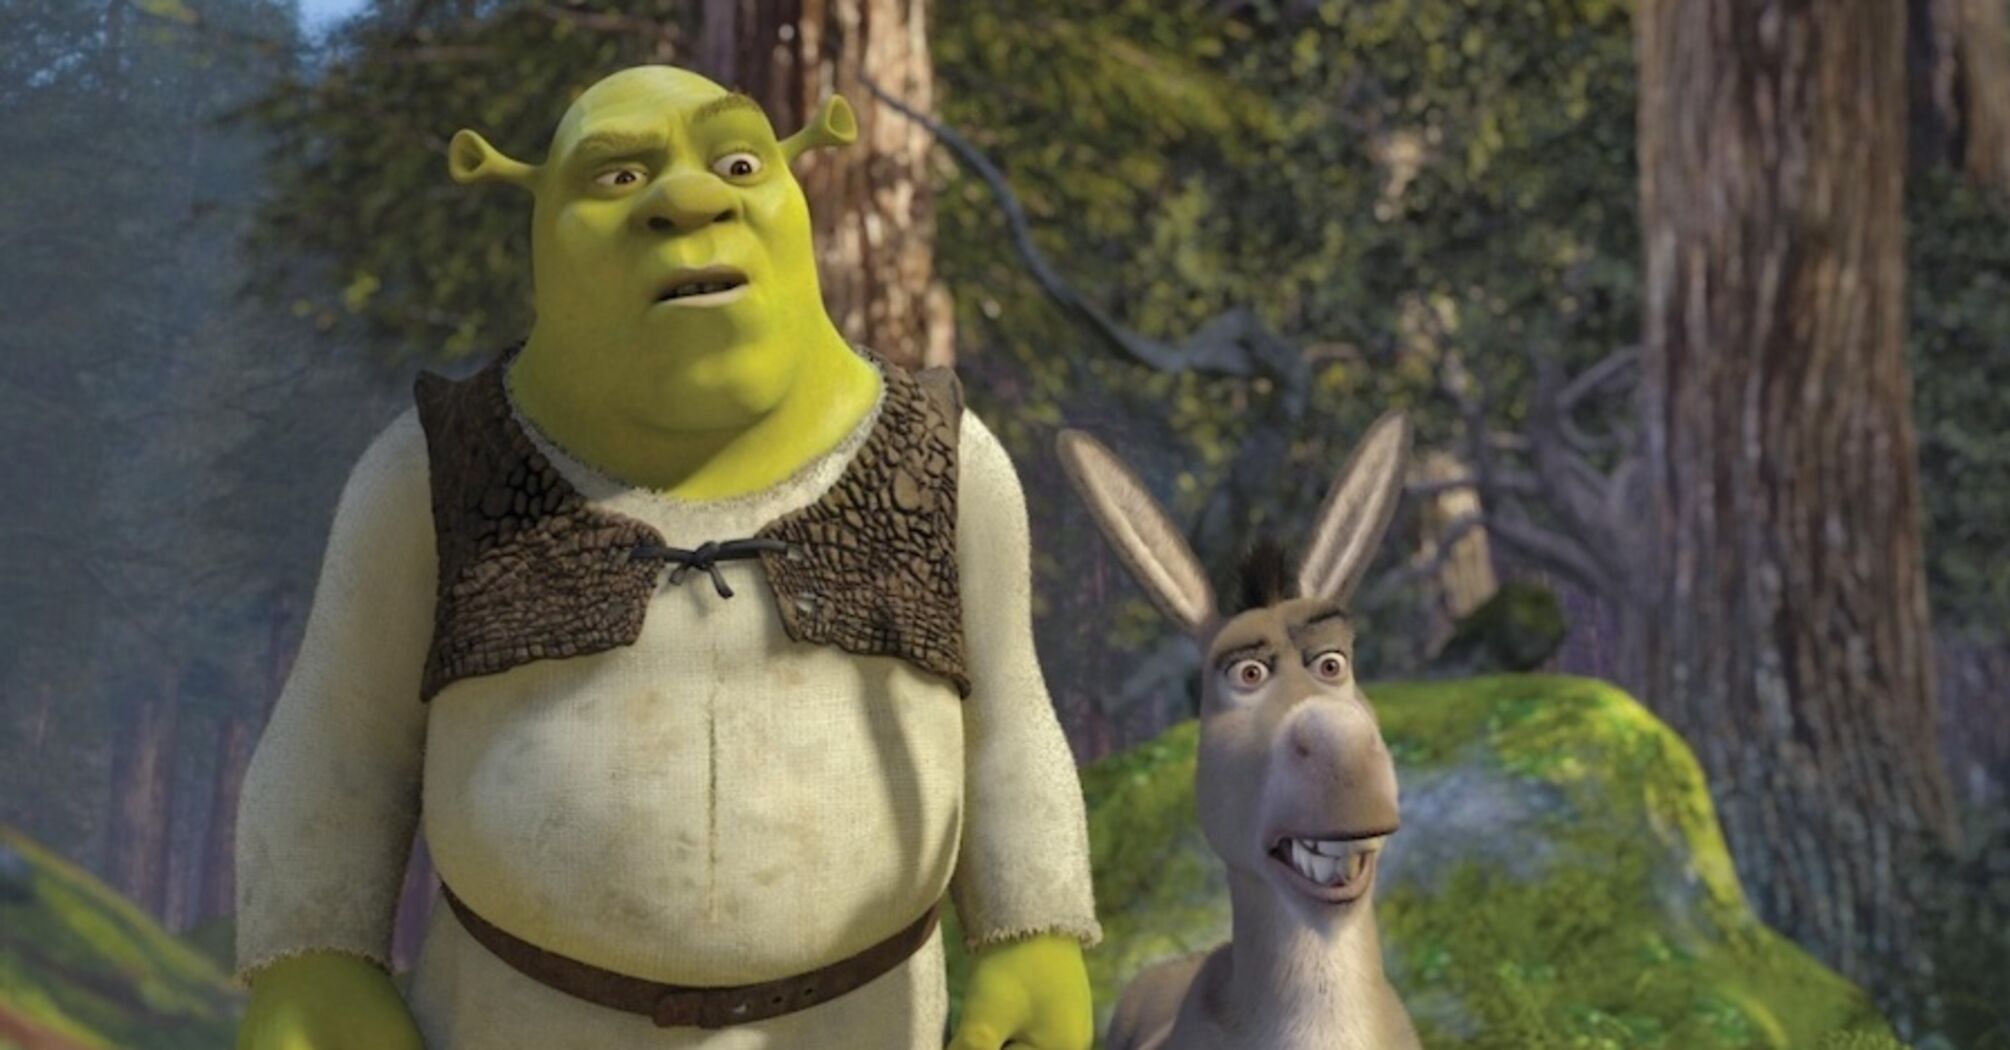 'Shrek' is coming back. Eddie Murphy announced the start of filming and announced a spinoff about Donkey